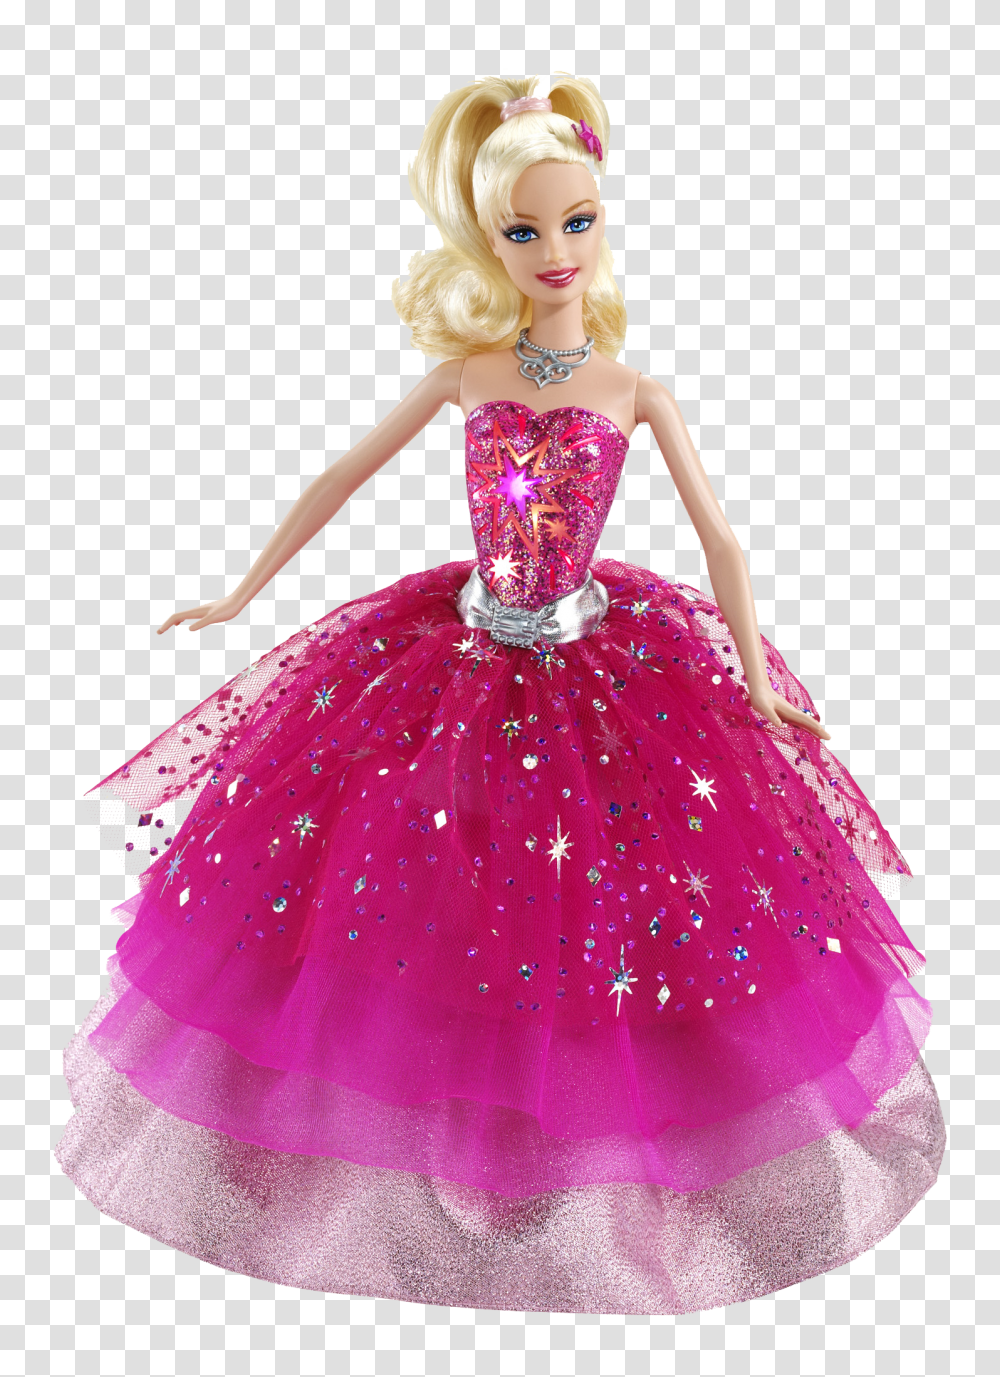 Barbie, Character, Doll, Toy, Figurine Transparent Png